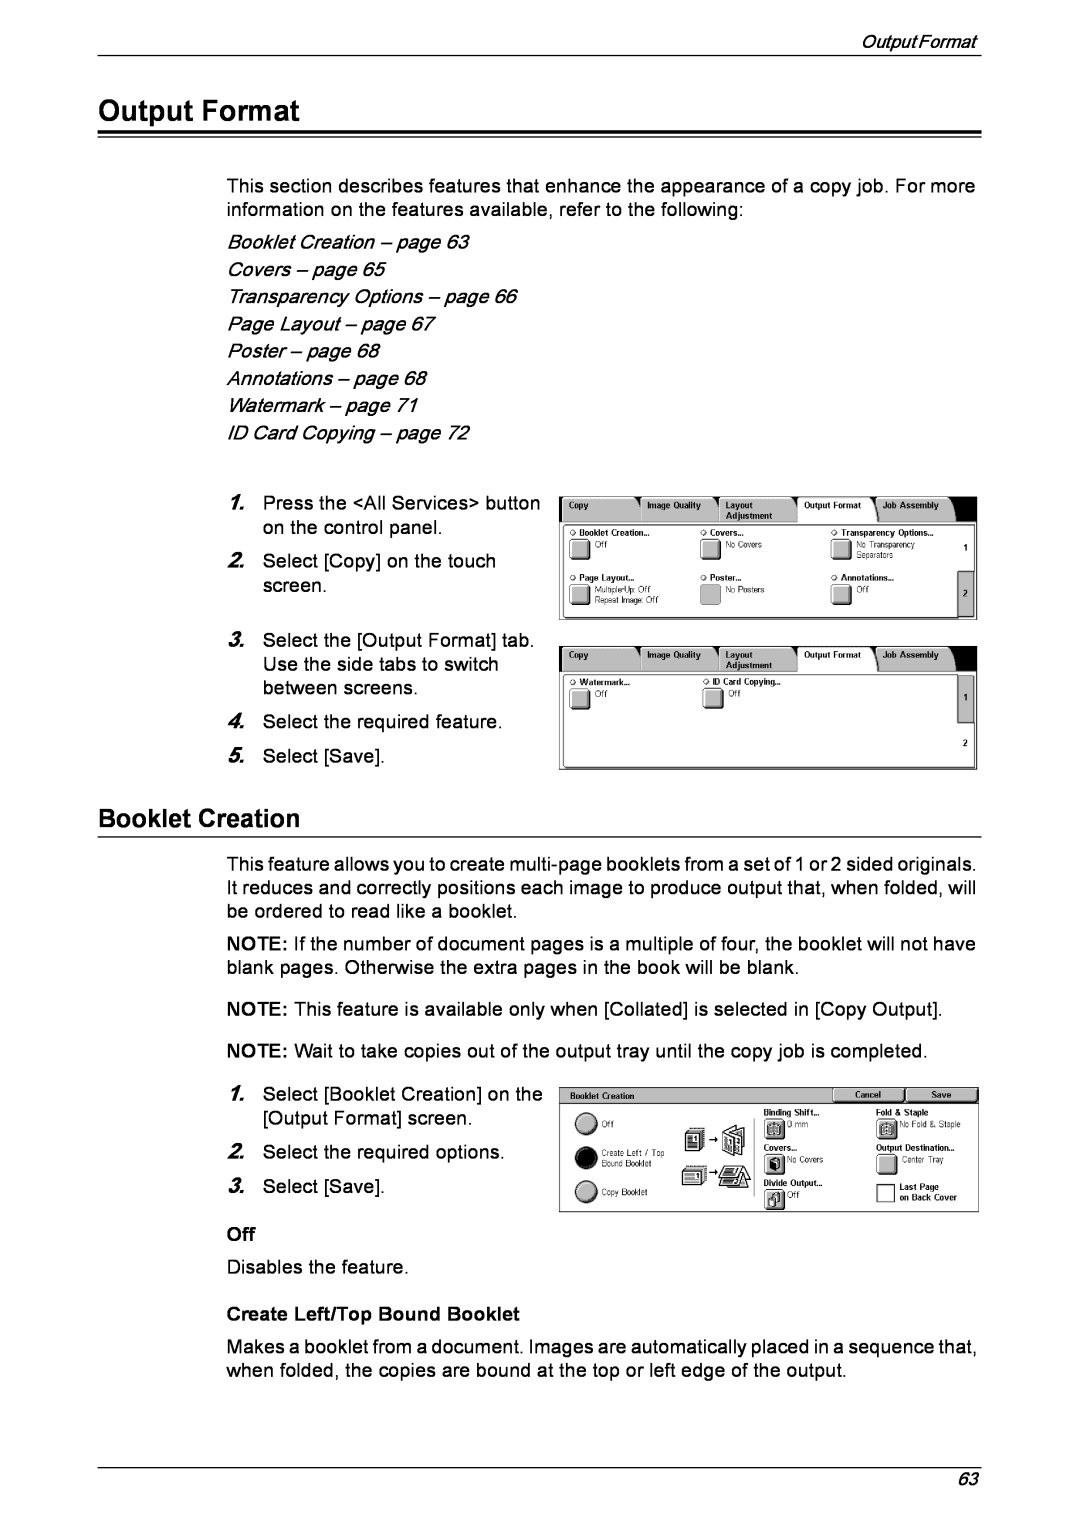 Xerox 5230 manual Output Format, Booklet Creation – page Covers – page, Transparency Options – page Page Layout – page 